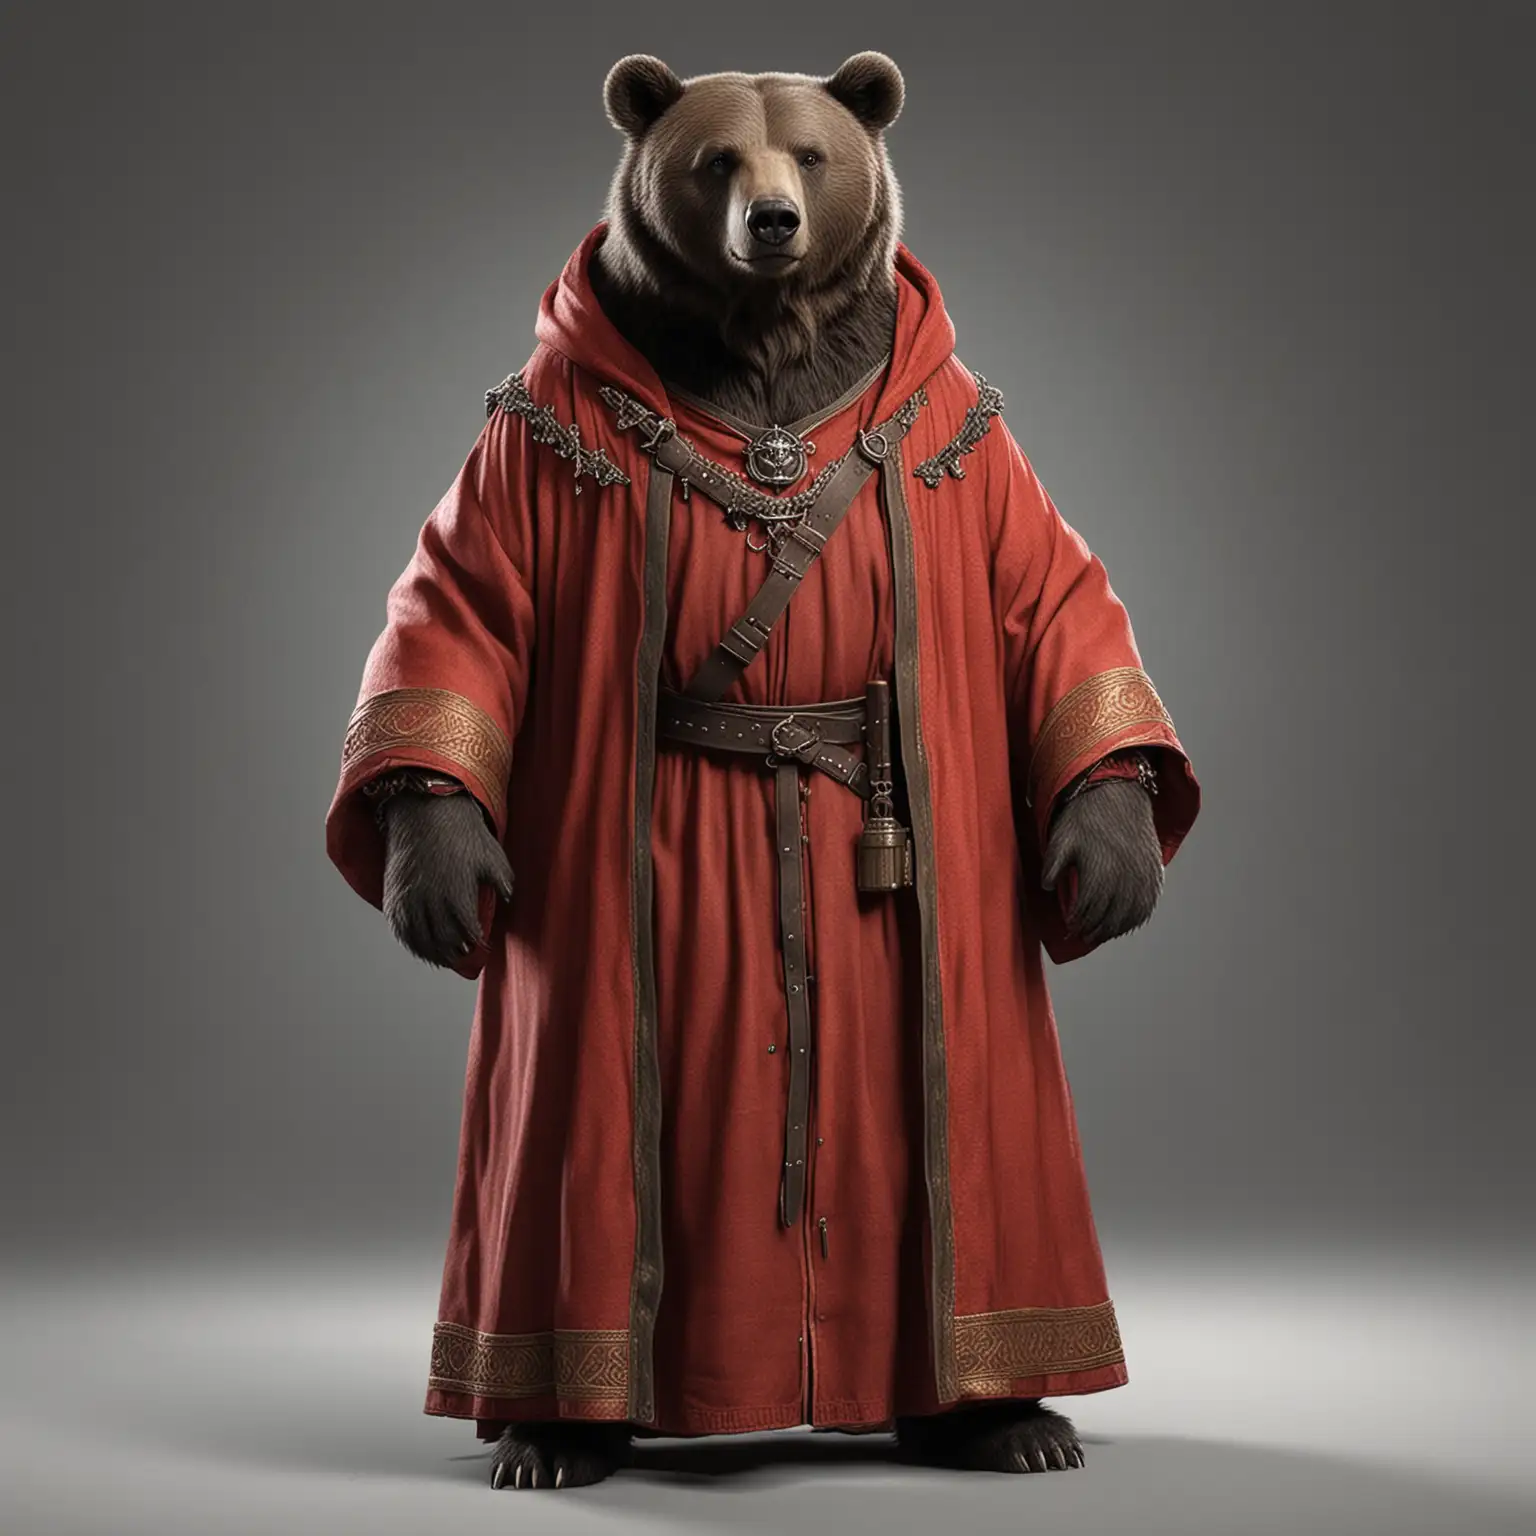 Realistic Bear Inquisitor in Red Medieval Robe Full Length